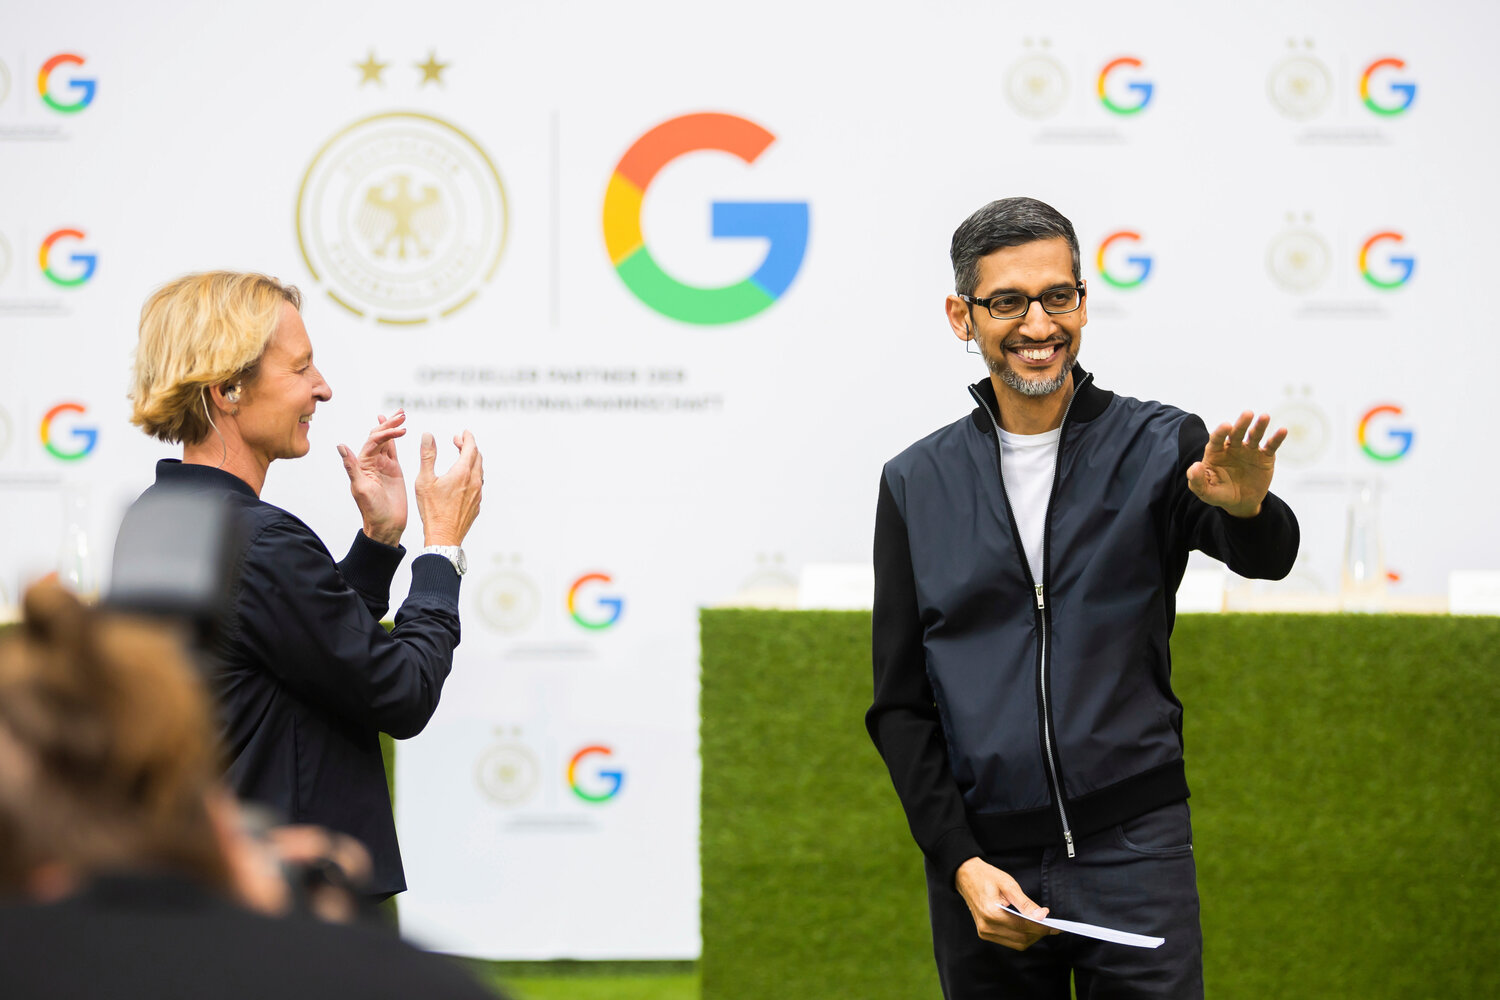 Sundar Pichai, CEO of Google and Alphabet, right, has referred to recent company layoffs as "removing layers to simplify execution and drive velocity in some areas.” He calls this "role elimination.”